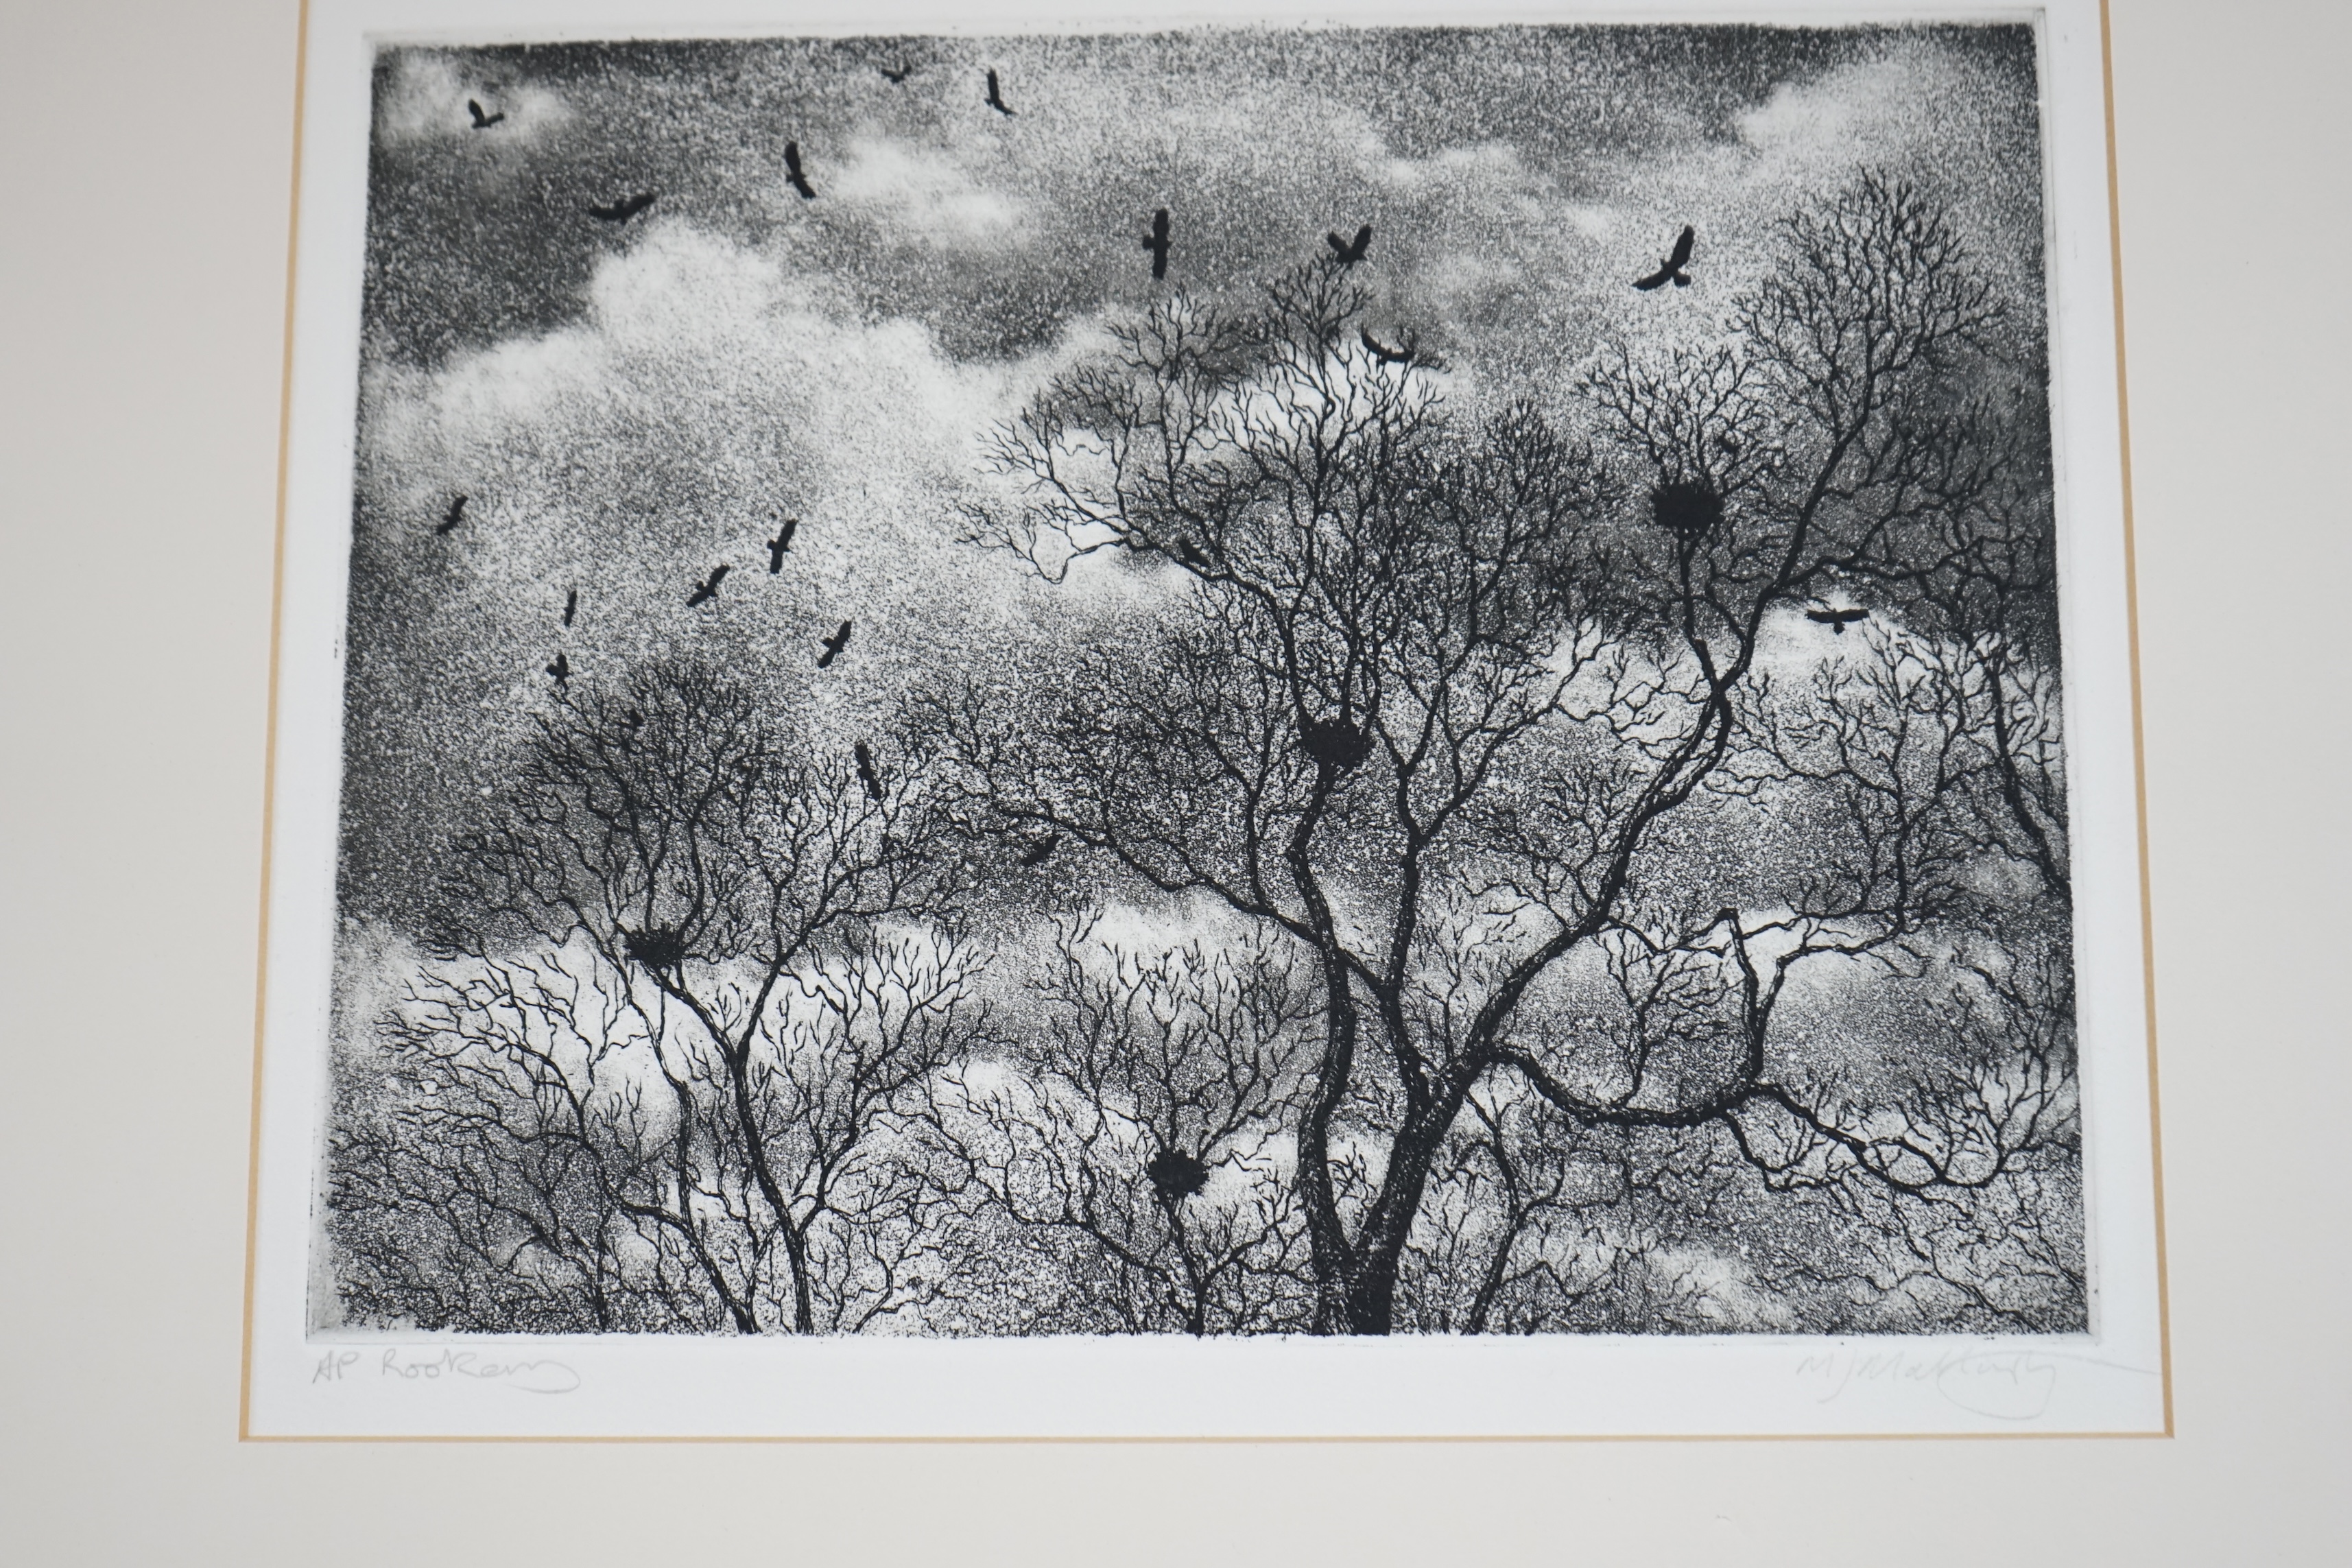 Michael Mattingley, artists proof etching, ‘Rookery’, together with Olga Leykina, linocut, ‘Breakfast’, limited edition 1/15, each signed in pencil, largest 52 x 64cm. Condition - fair to good